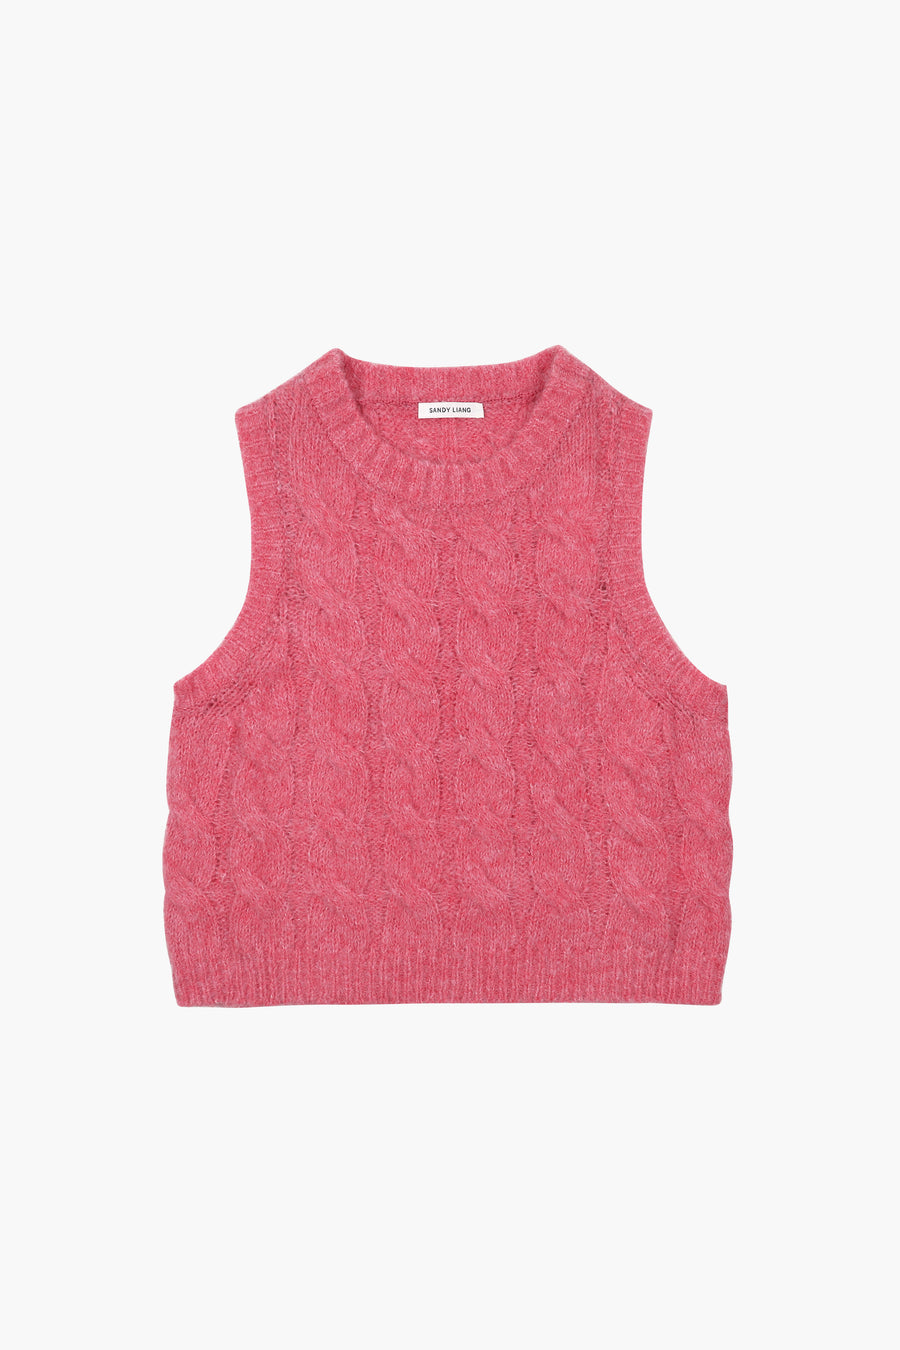 Cable knit sweater vest in candy pink